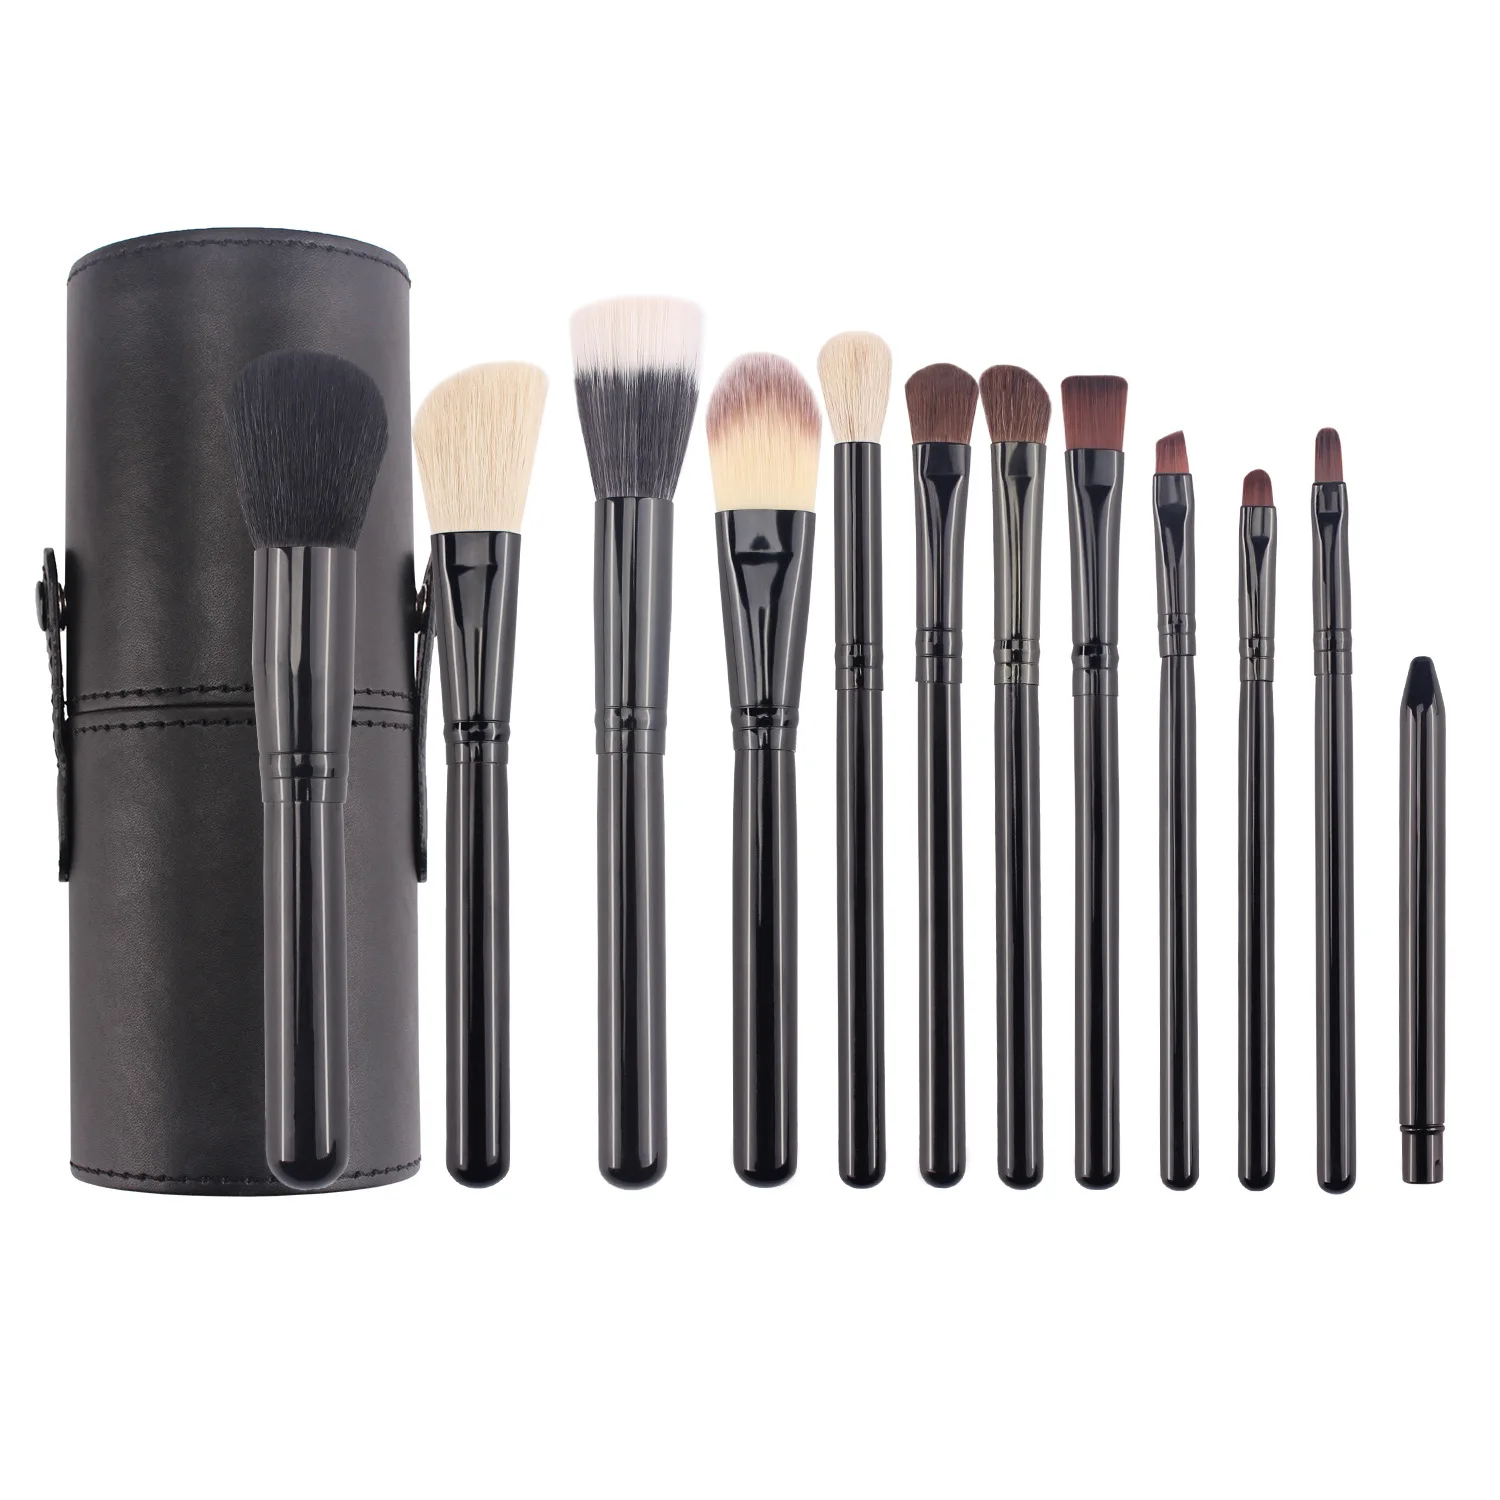 Multi-use 12pcs private label synthetic fibre cosmetic makeup brush set with PU bag case